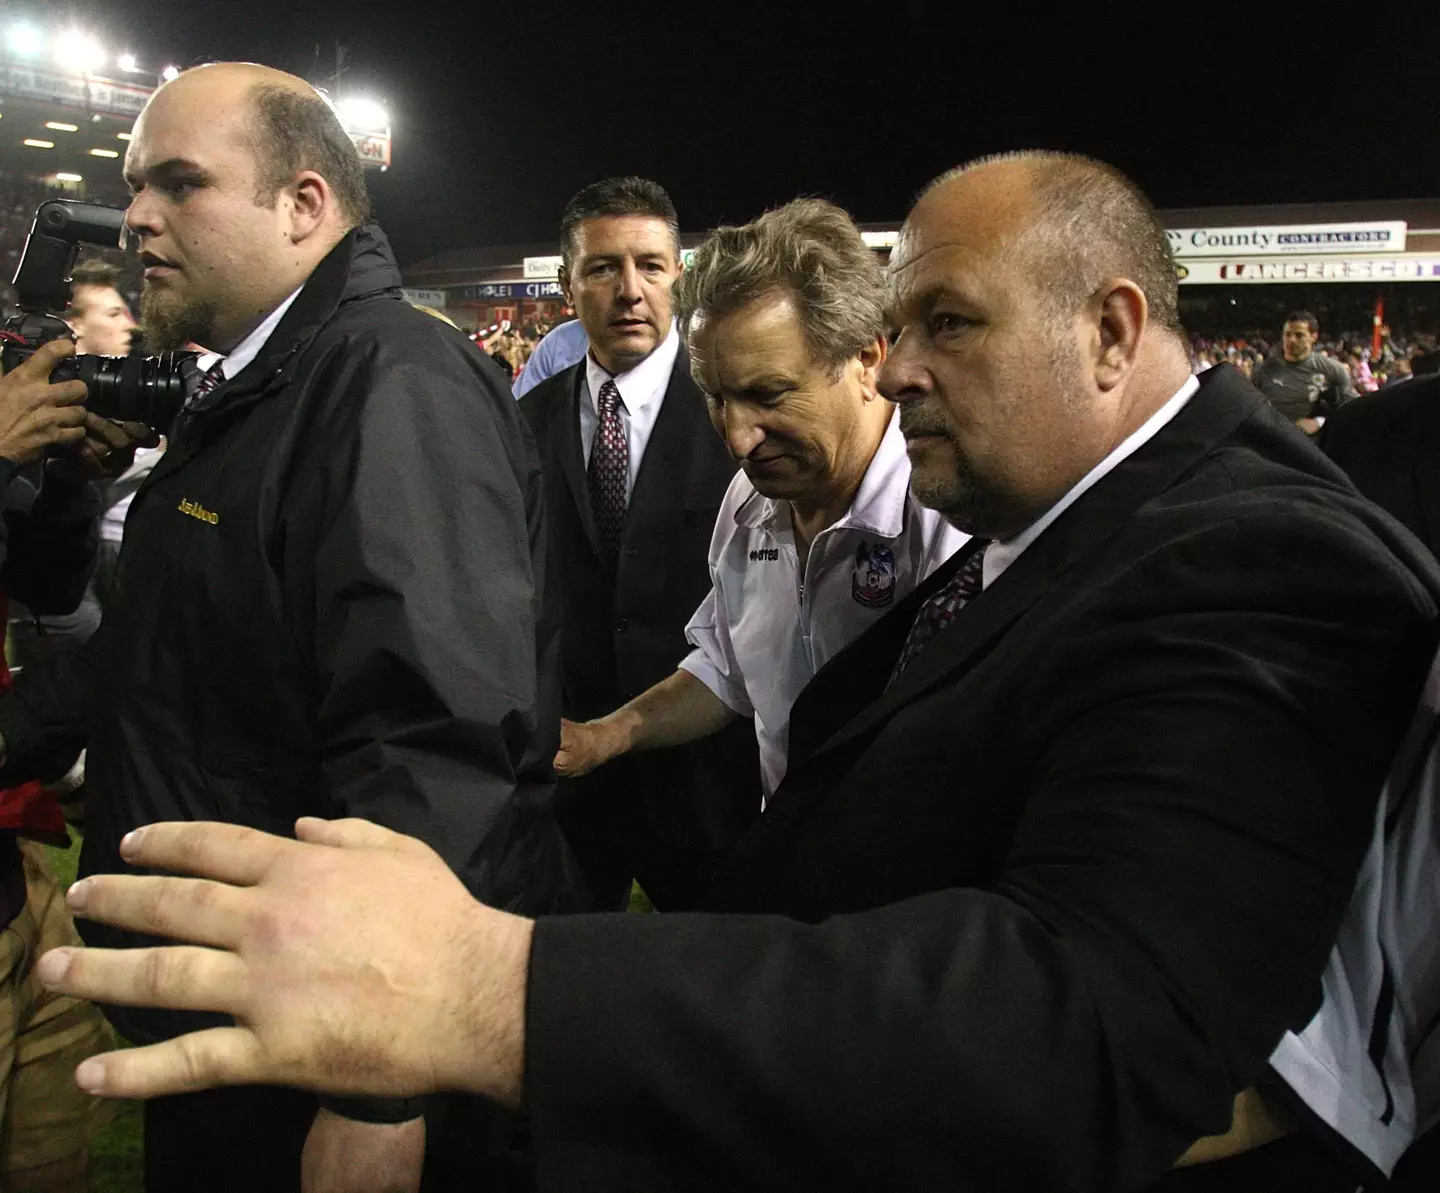 Neil Warnock escorted off the pitch at Ashton Gate. Image: Alamy 